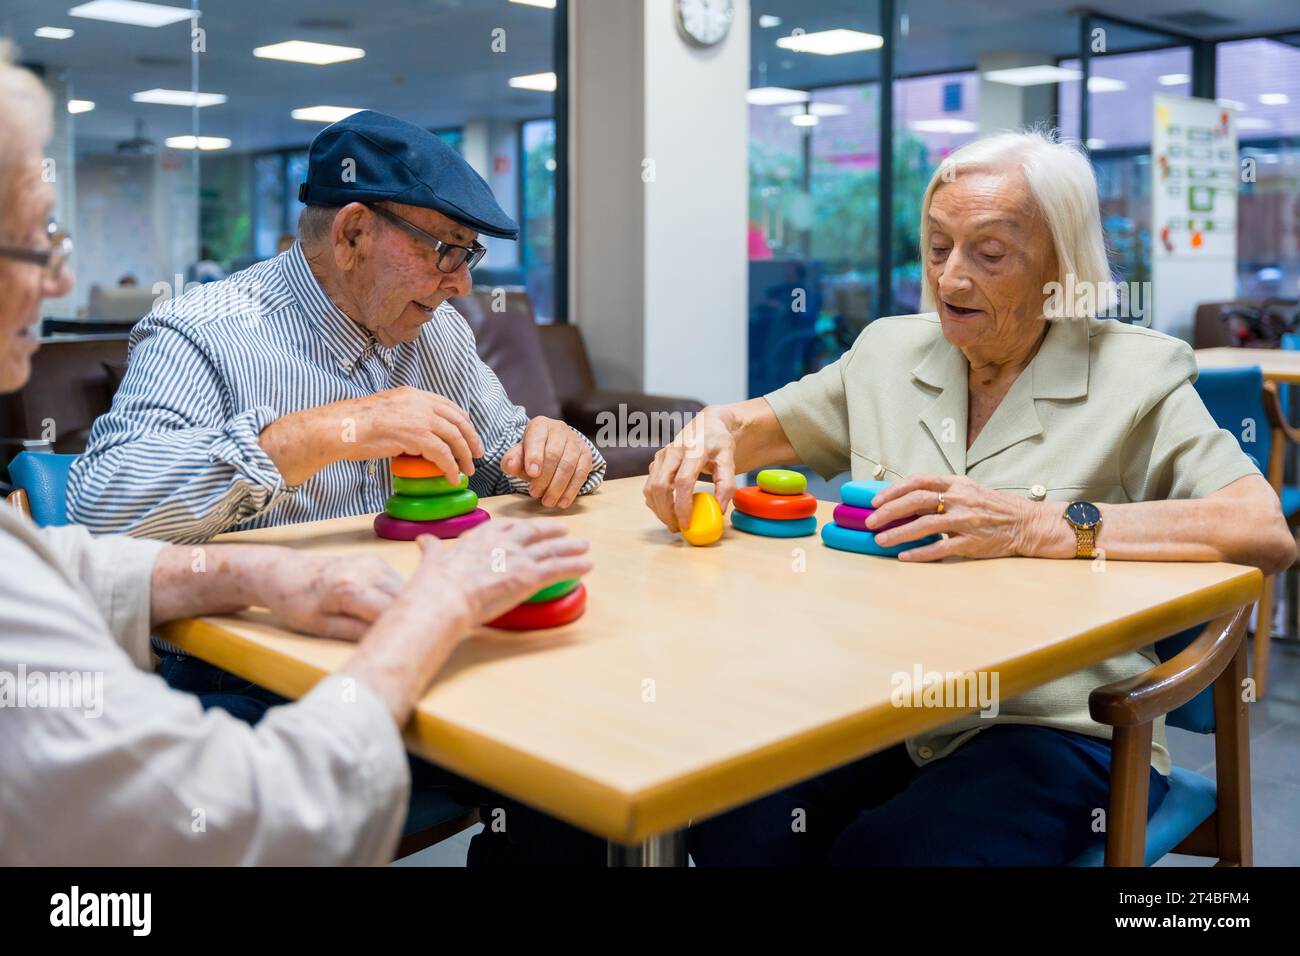 Aged people in a nursing home sharing skills games sitting on a table together Stock Photo